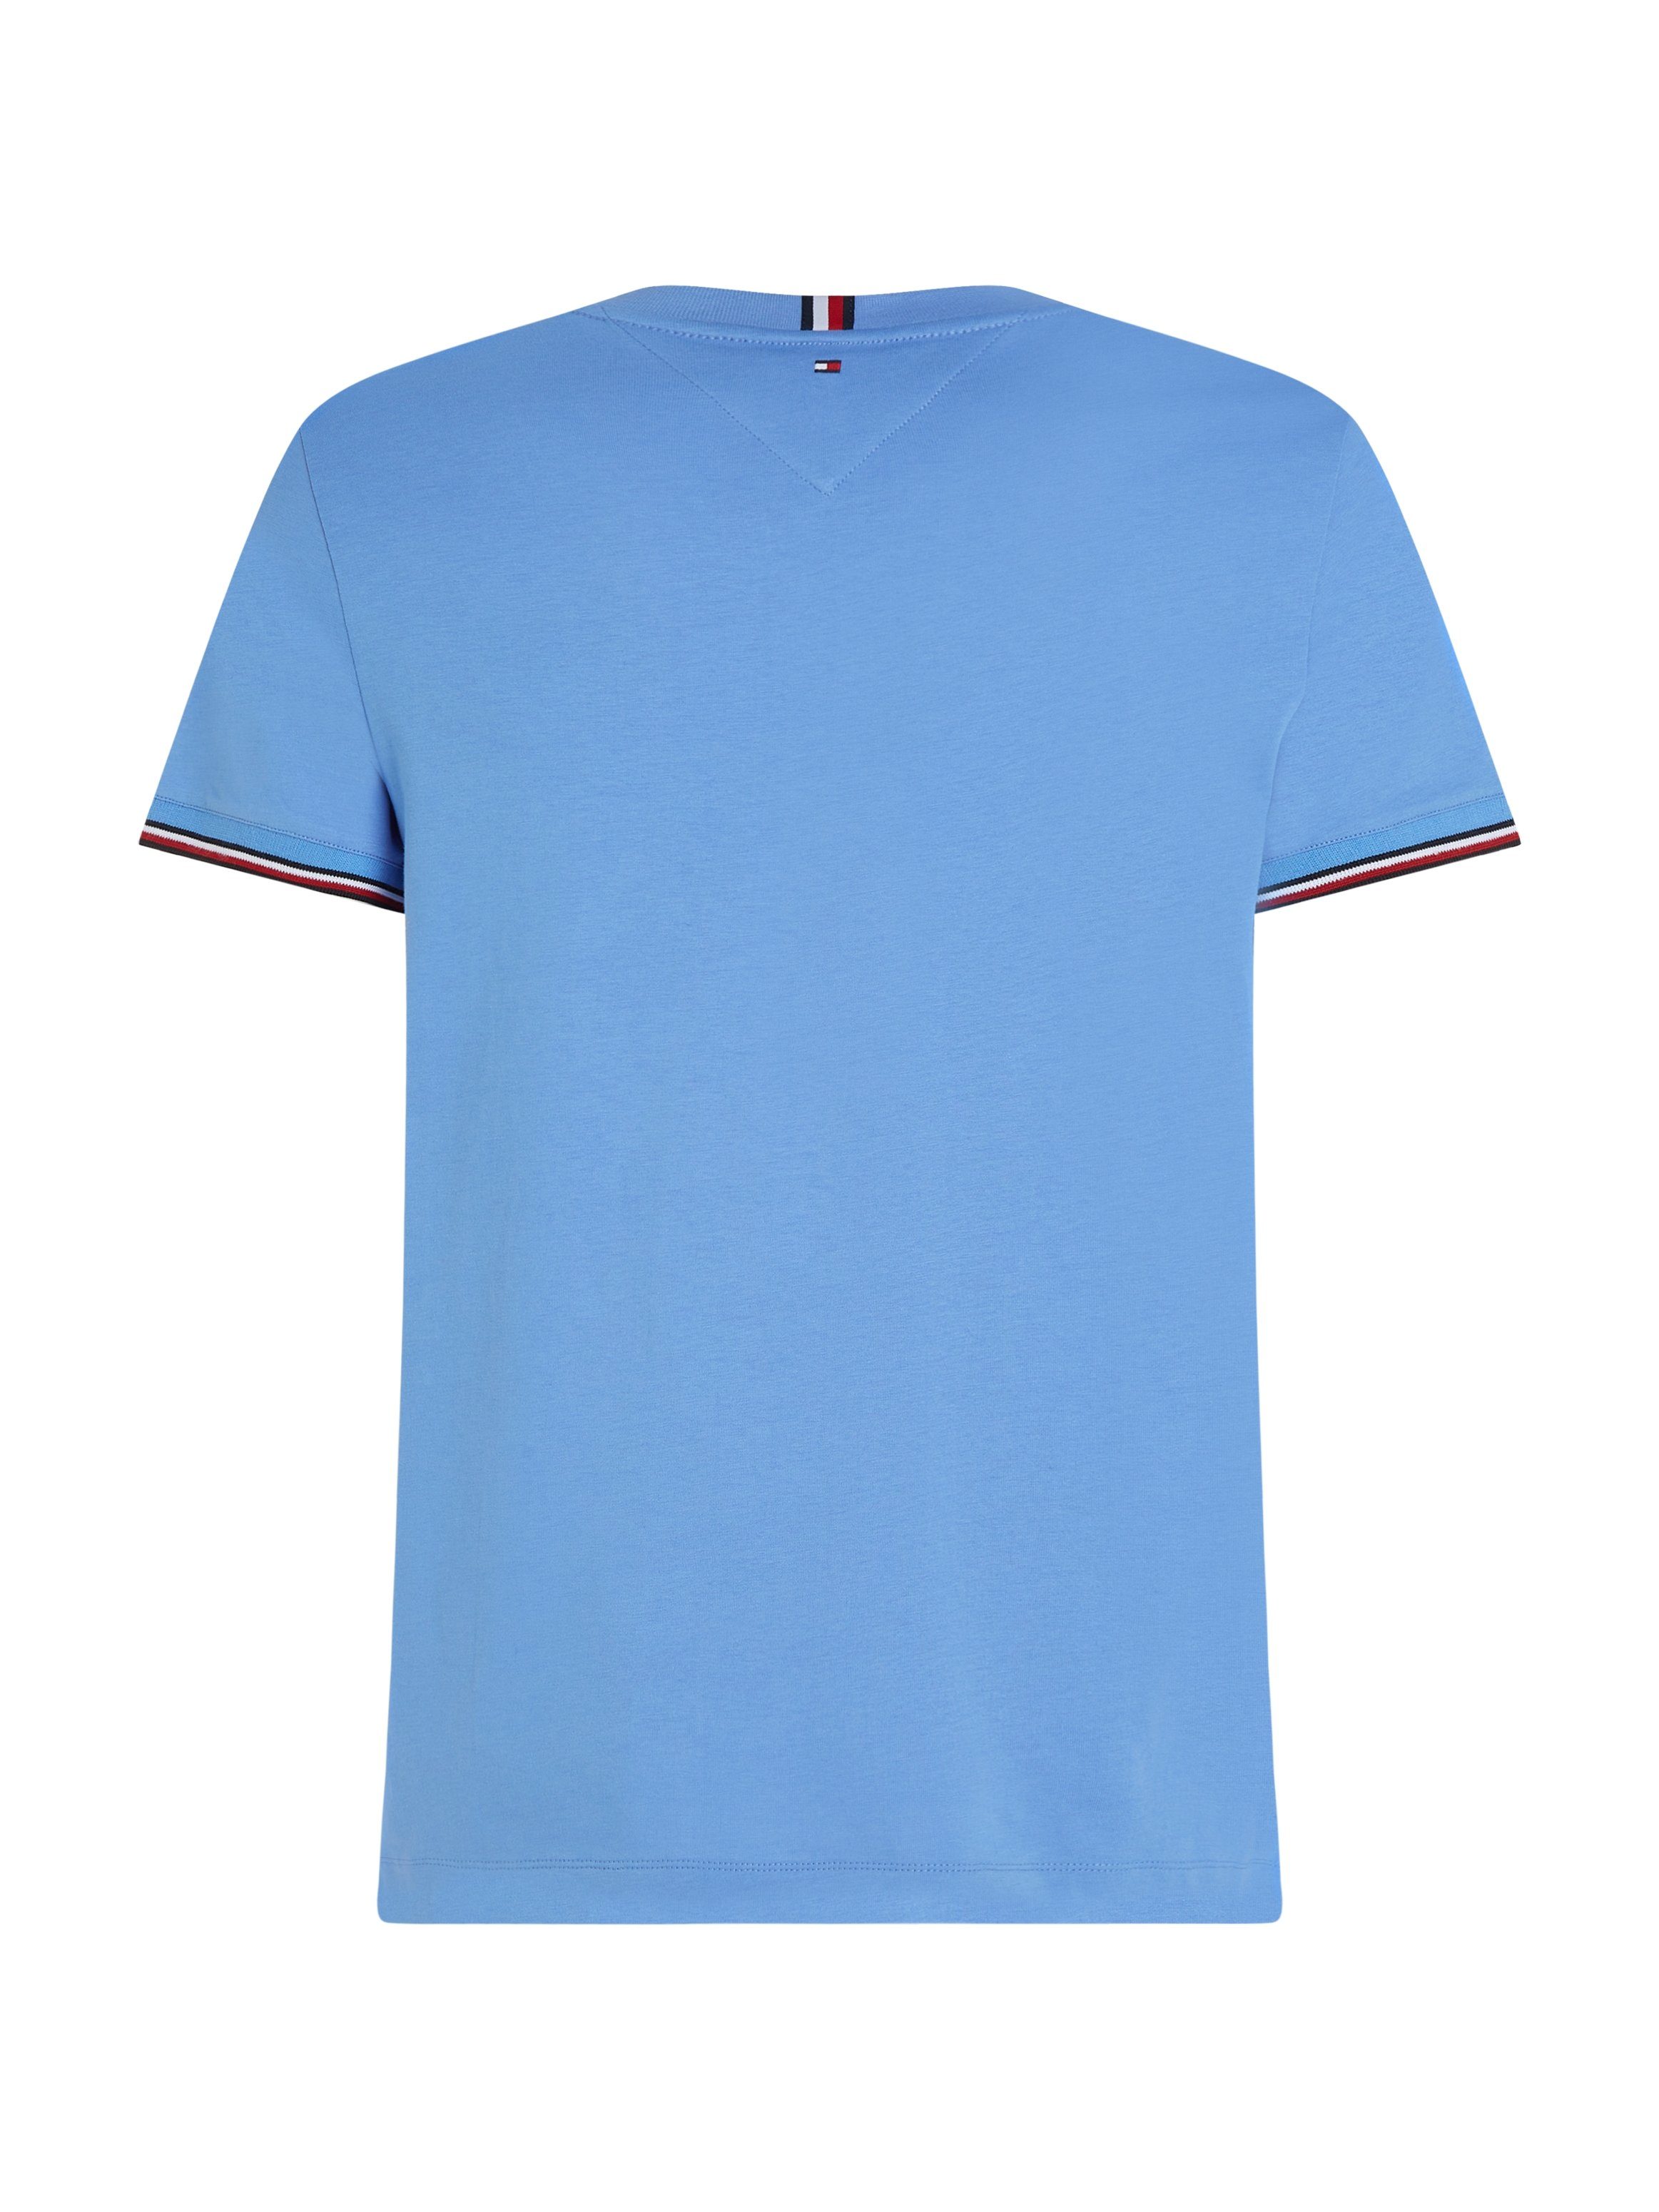 Tommy Hilfiger T-Shirt TOMMY spell LOGO TIPPED TEE blue